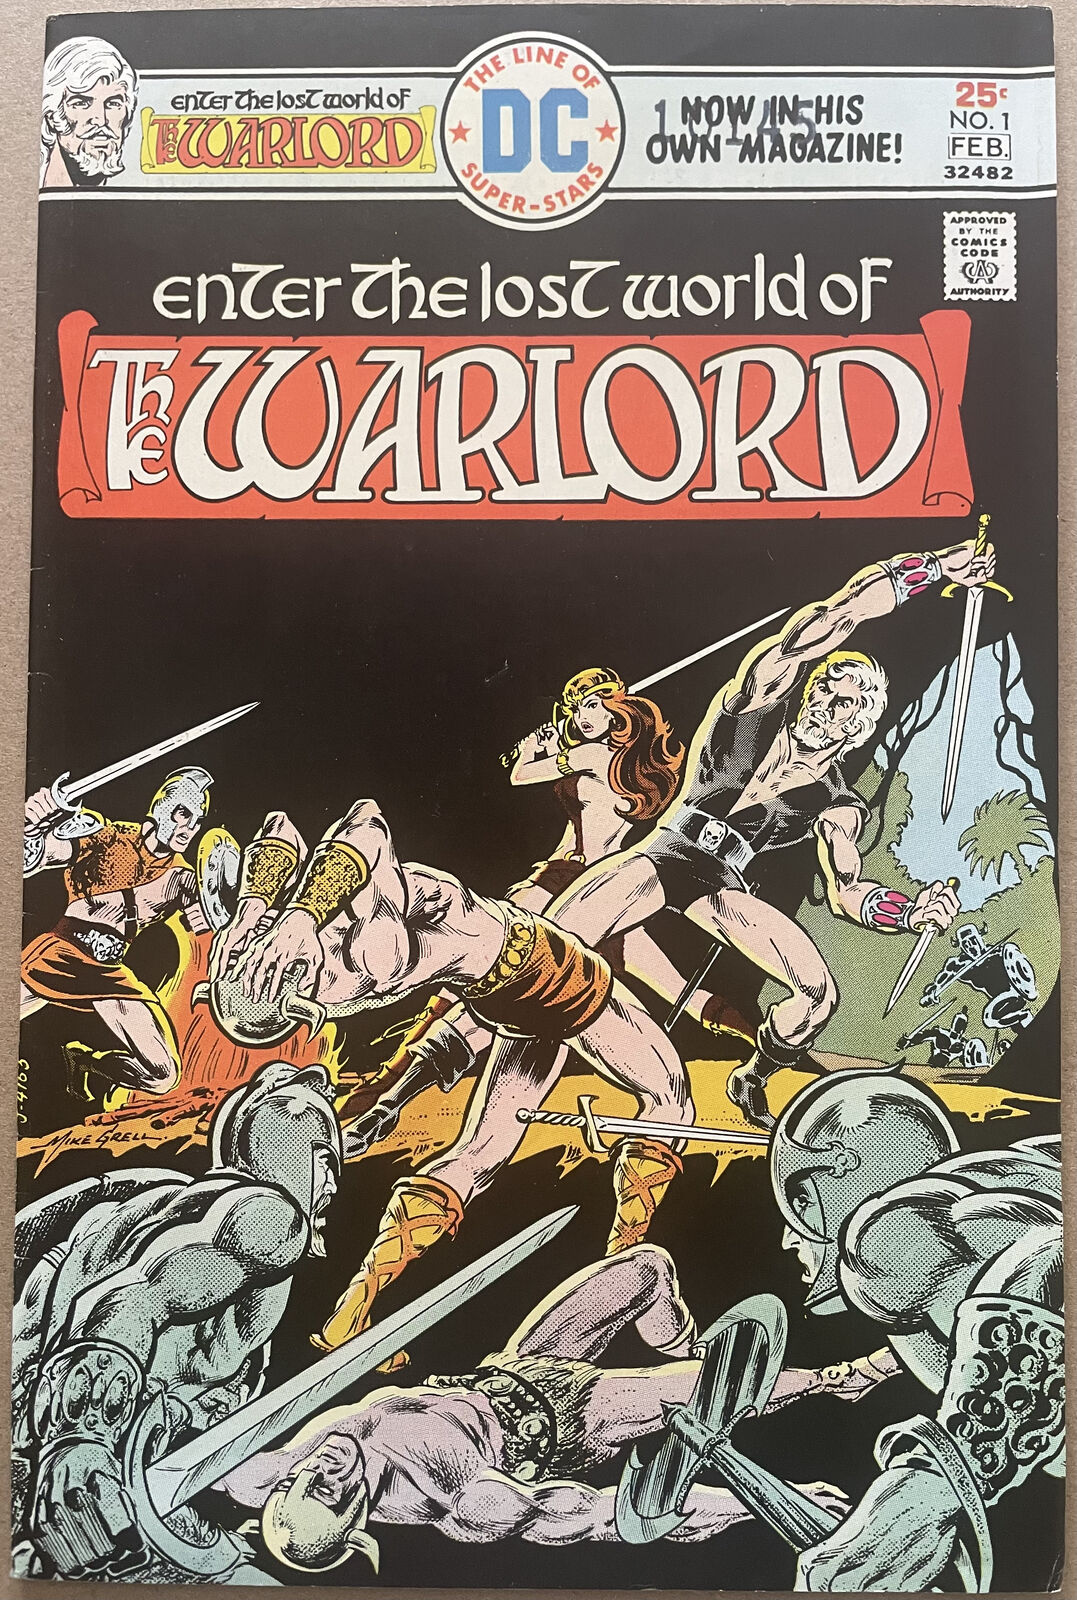 Warlord #1, VF, Mike Grell art, Bronze Age DC, 1976